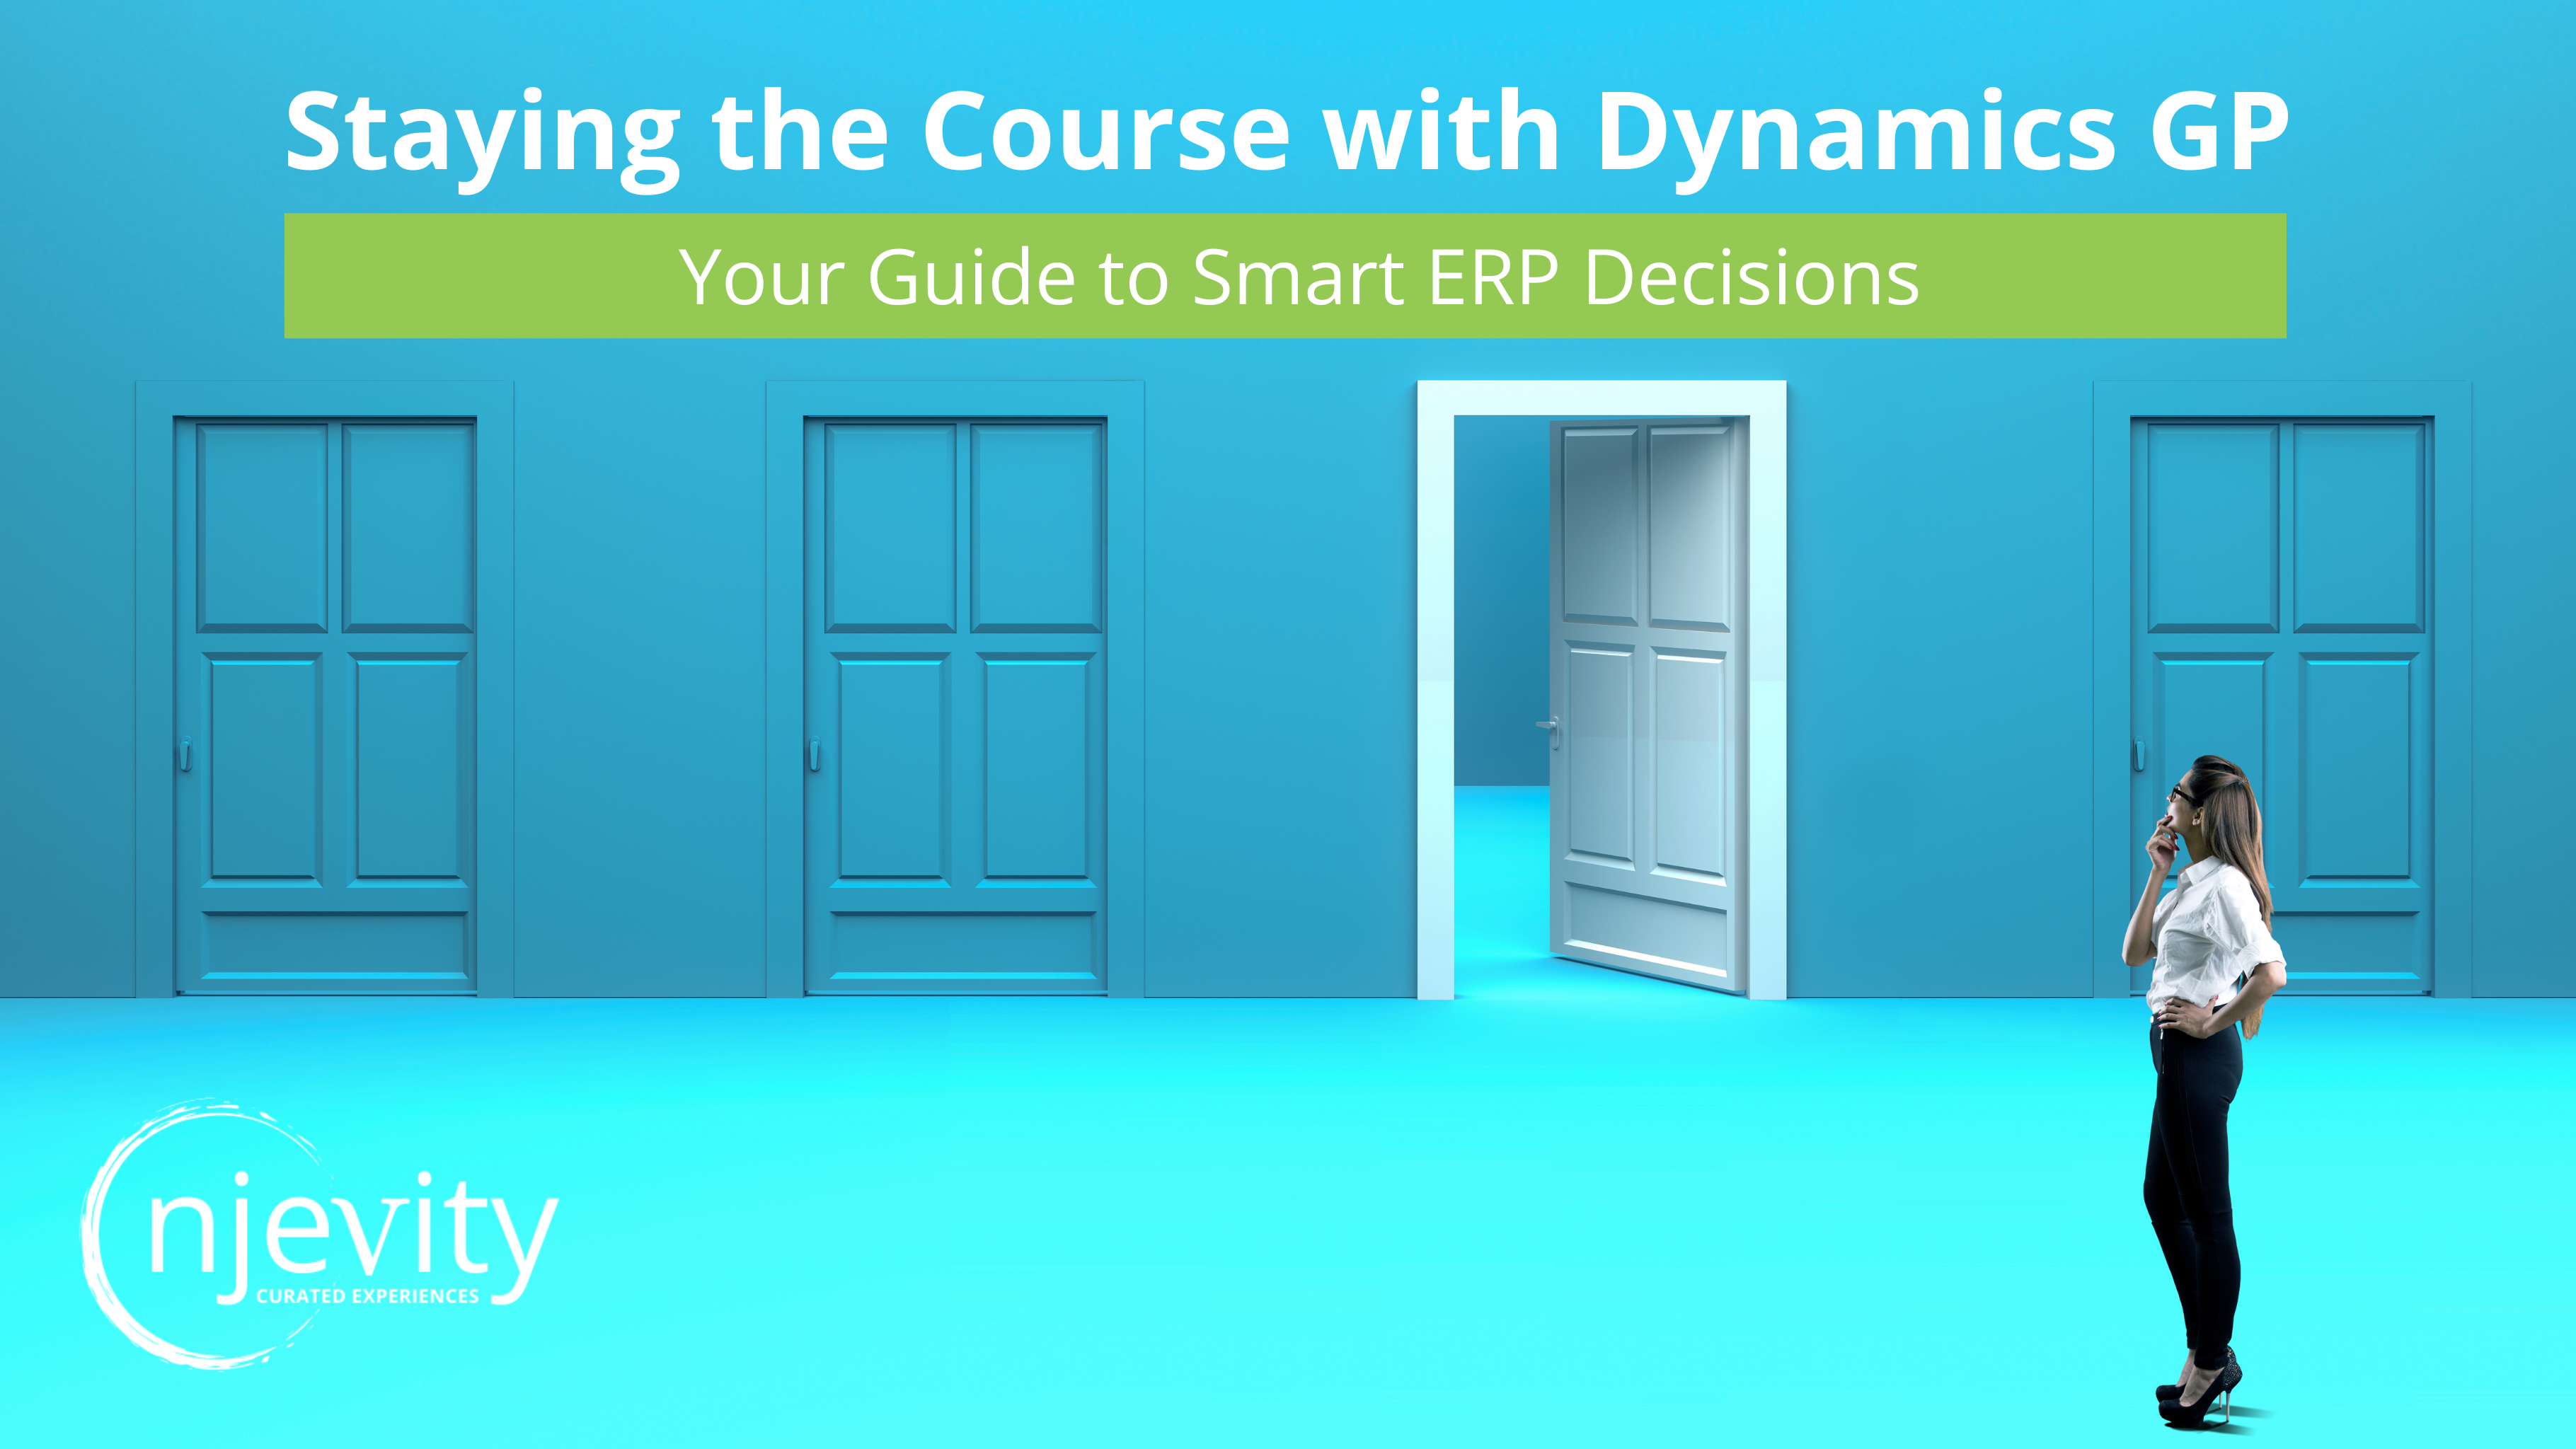 Staying the Course with Dynamics GP: Your Guide to Smart ERP Decisions